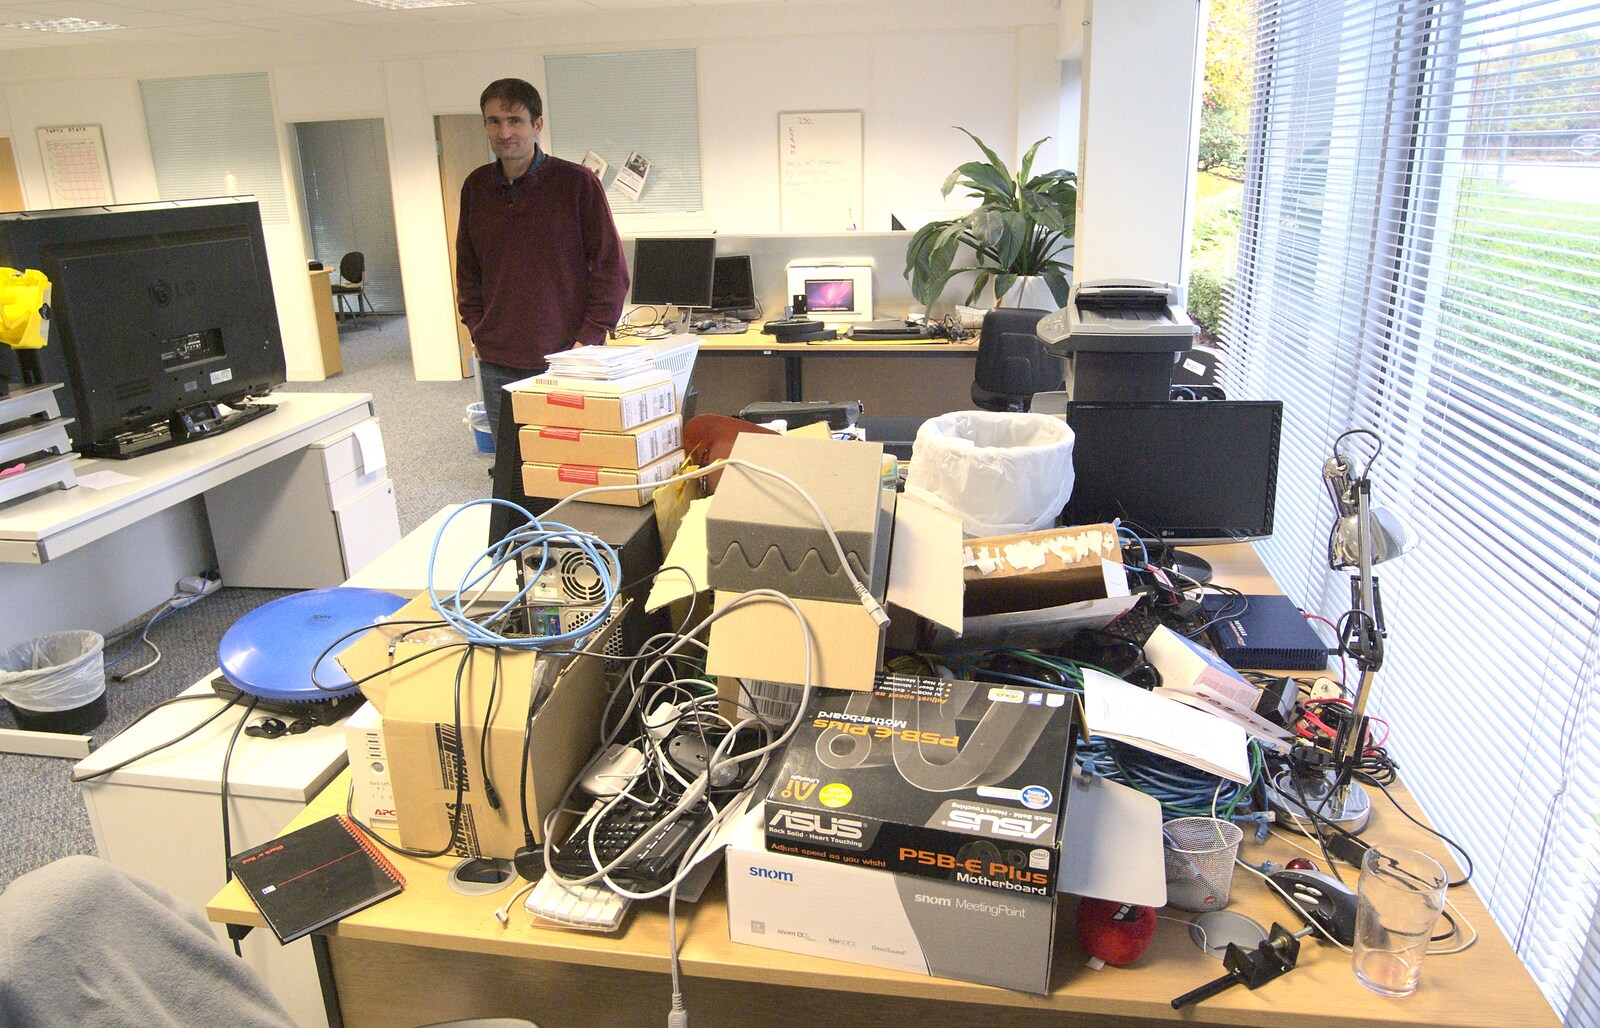 Bob looks over the pile of crap from Gemma Leaves, The Mellis Railway and Taptu Moves Desks, Cambridge - 24th October 2010